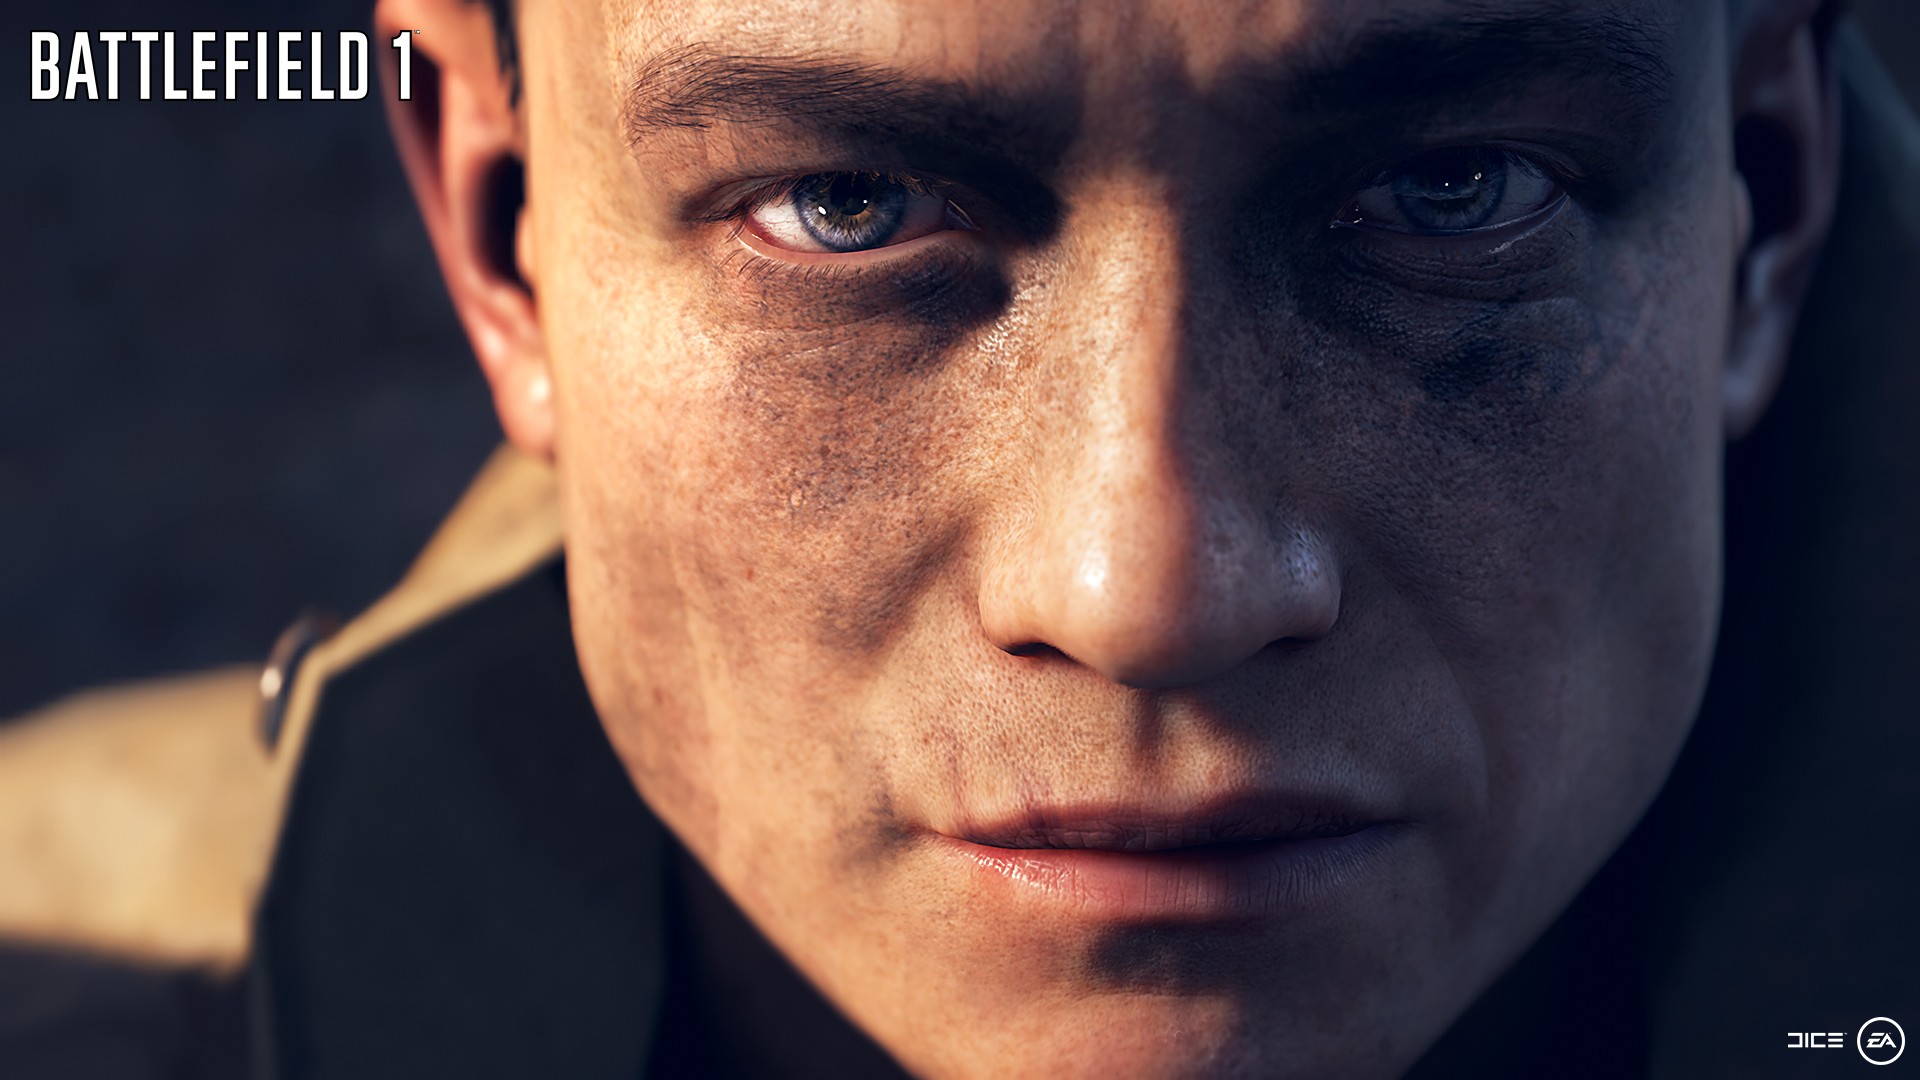 General 1920x1080 Battlefield 1 dice PC gaming EA DICE closeup face eyes video games video game men Electronic Arts